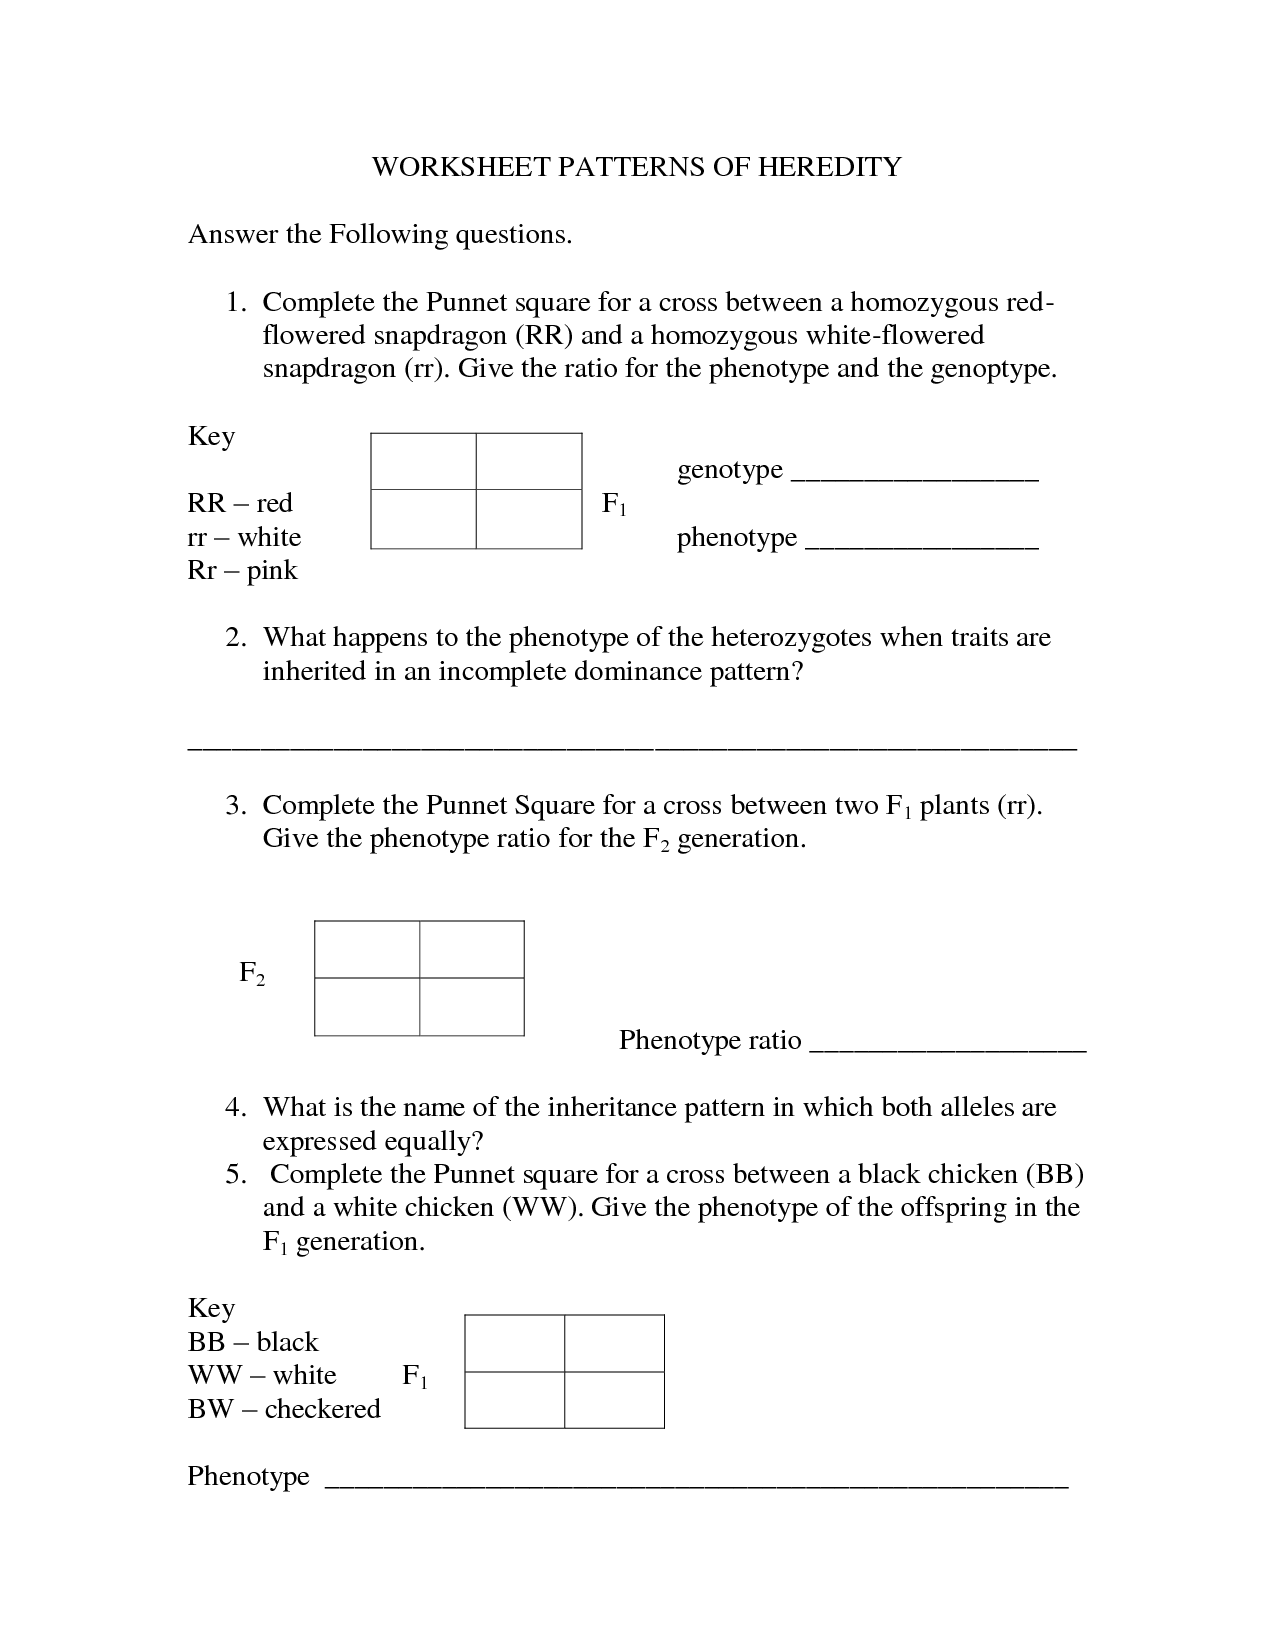 13-best-images-of-punnett-square-worksheets-with-answers-punnett-square-worksheet-answers